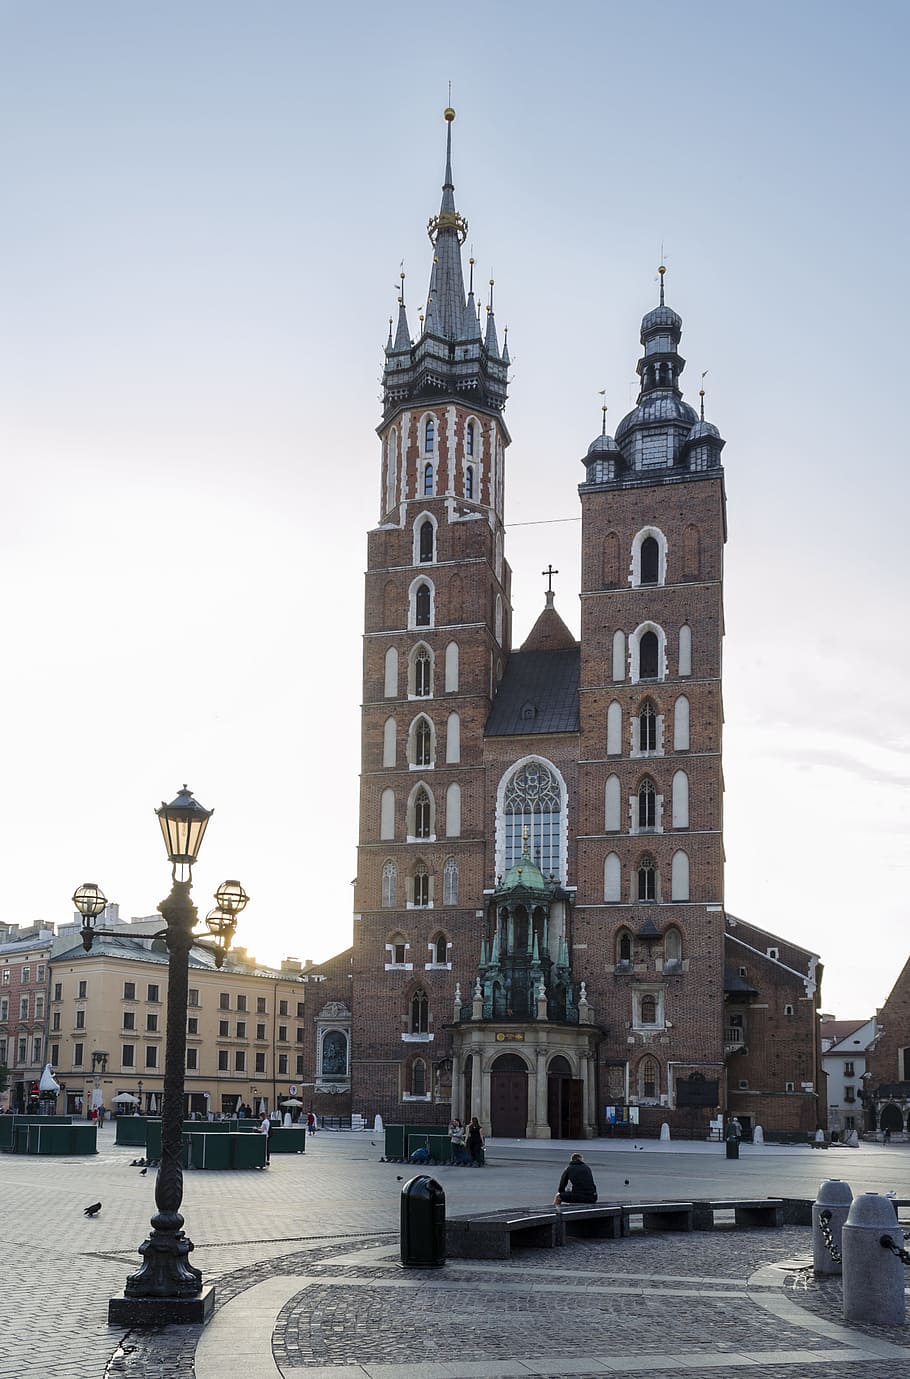 kraków, the market, poland, architecture, monument, the old town, st mary's church, tower, lantern, main market